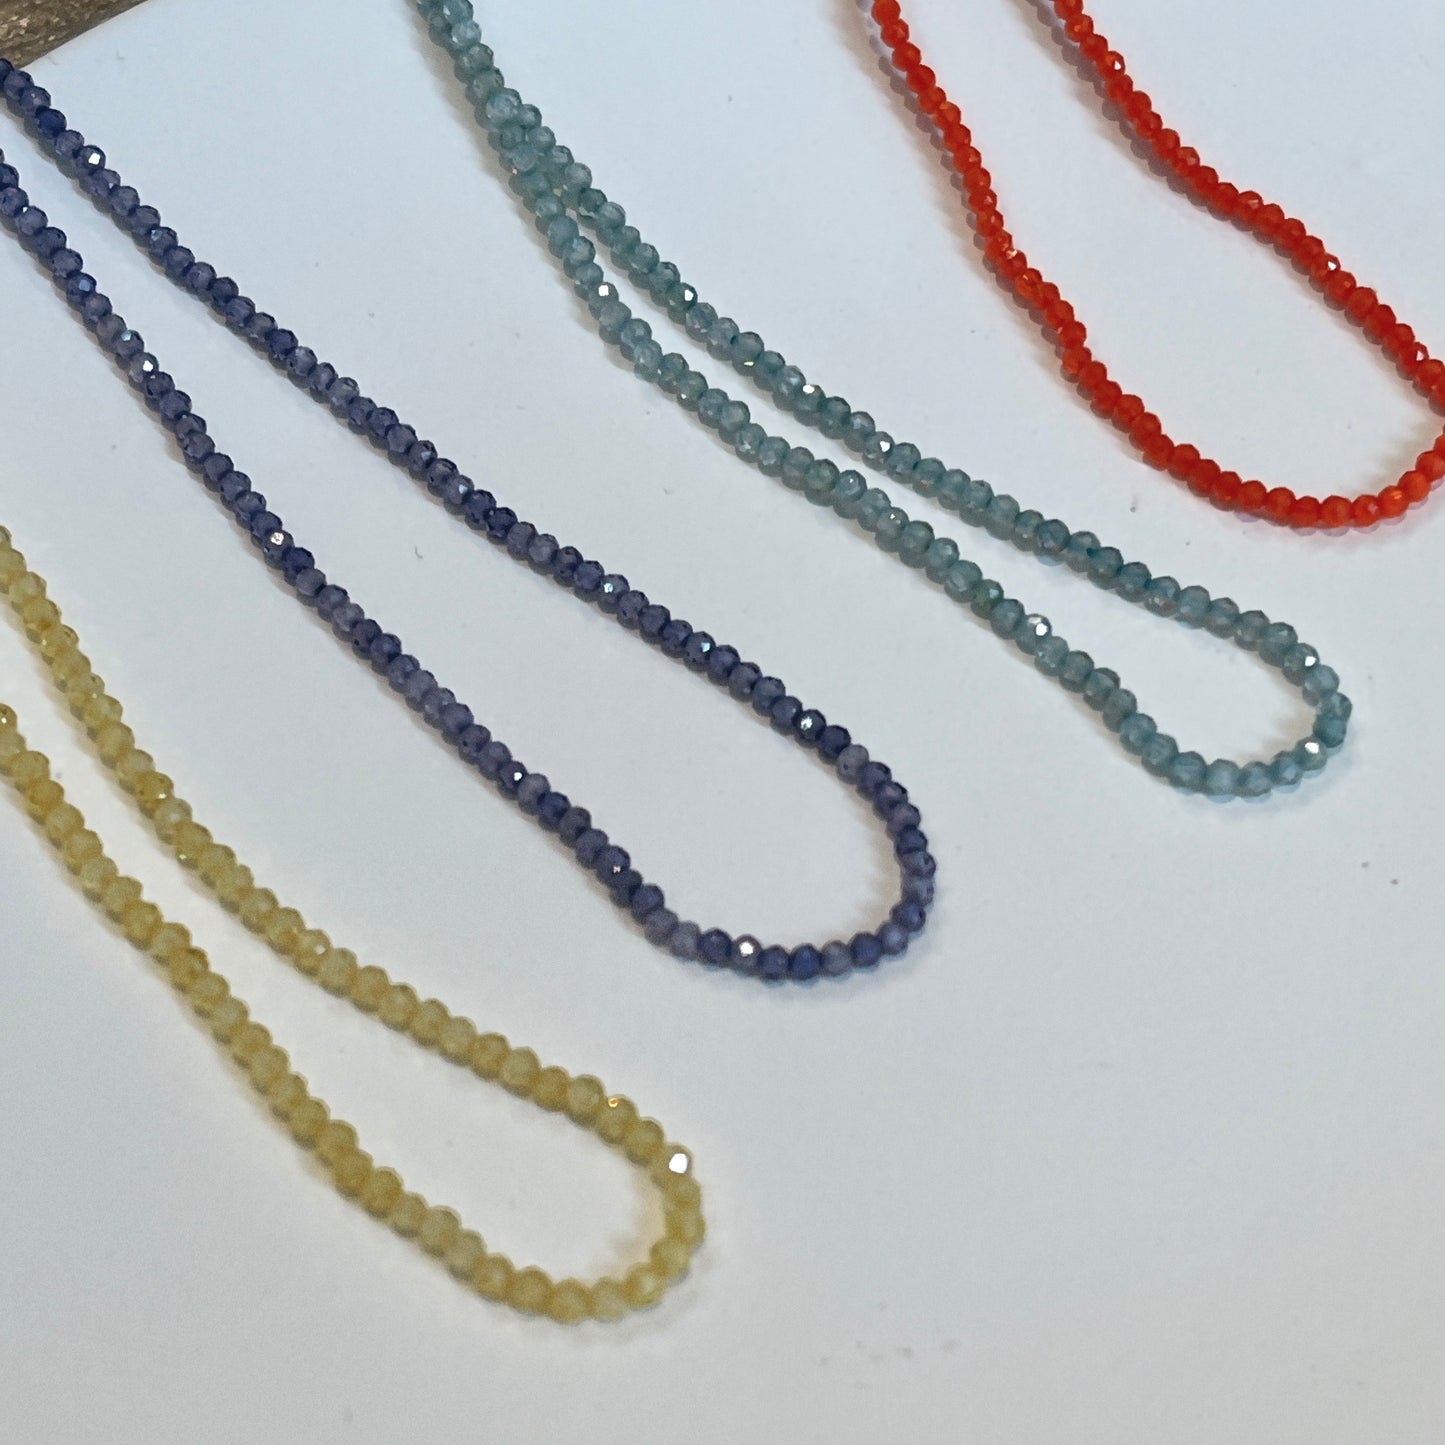 Bling Bling Color necklace